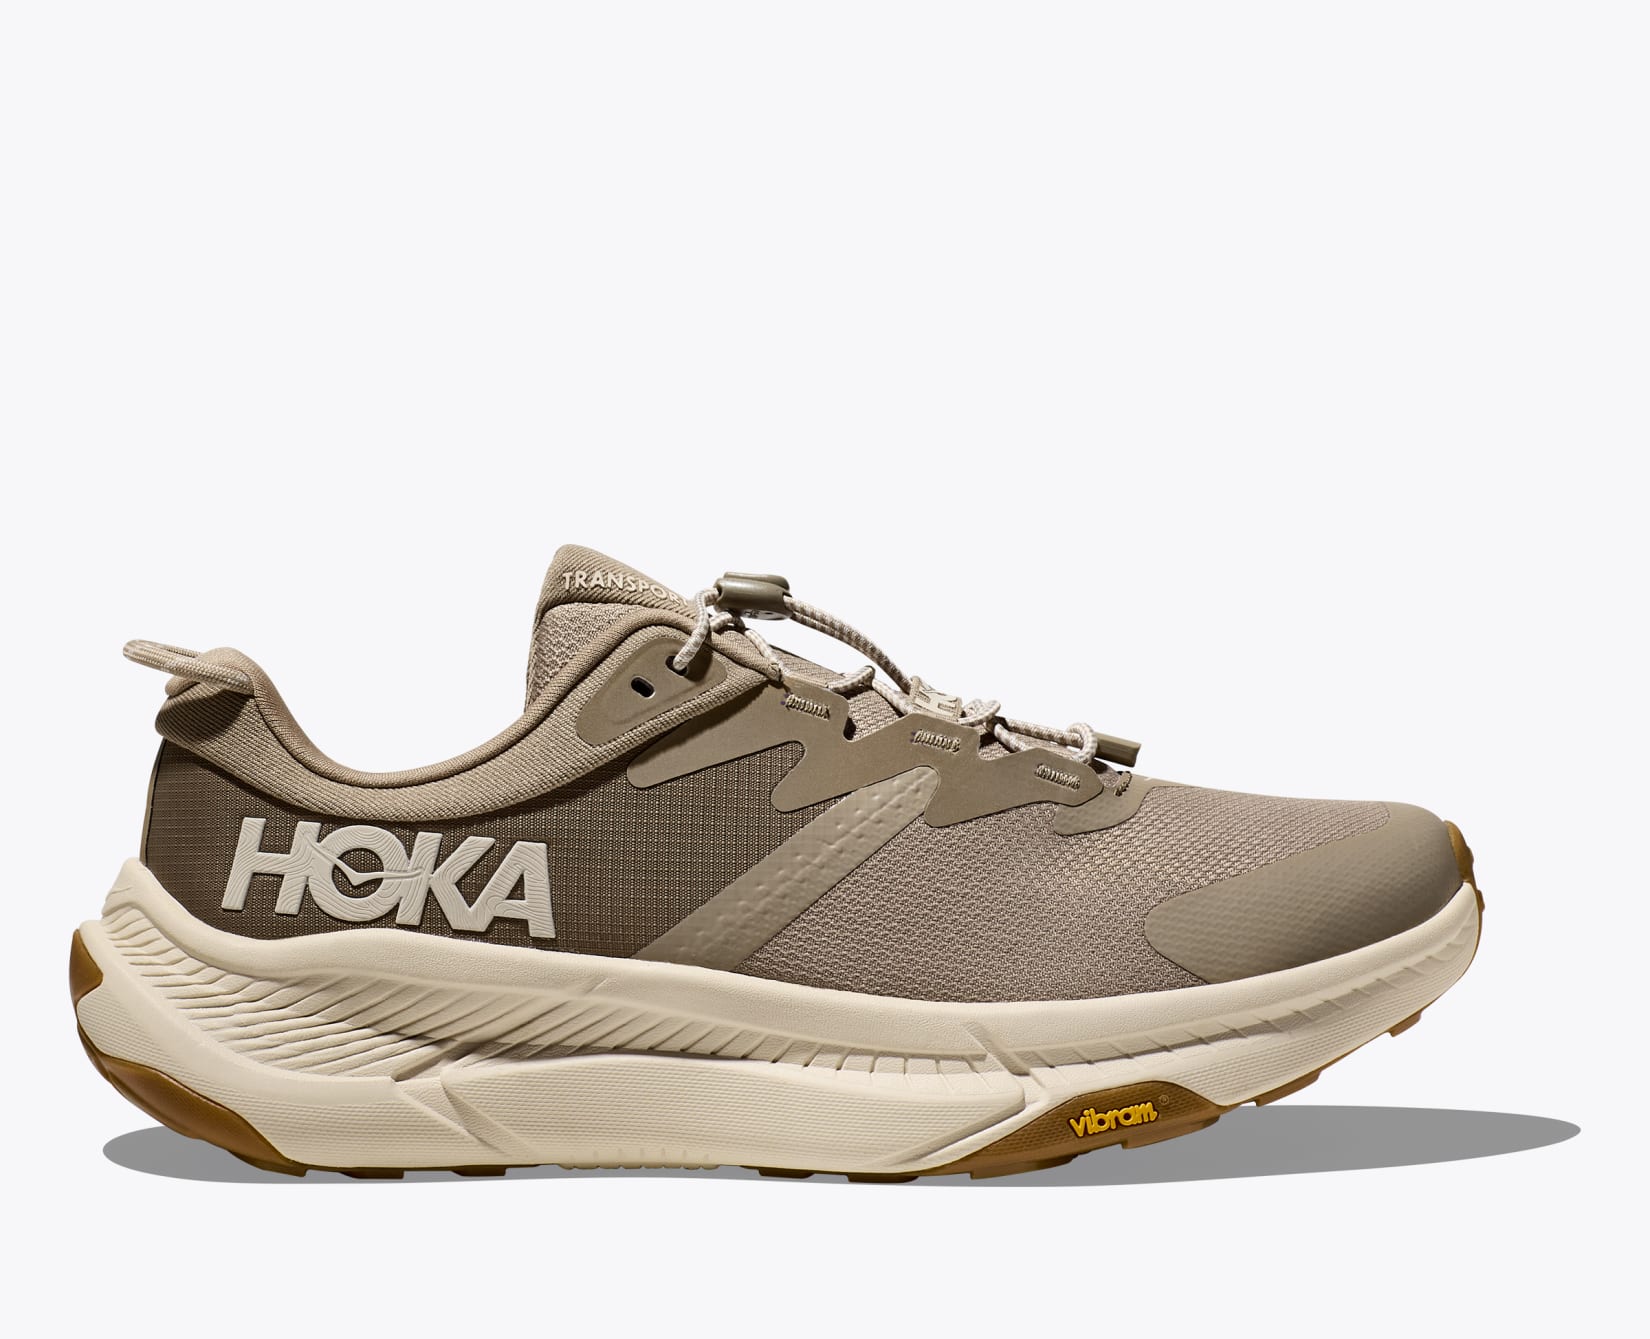 The New Hoka Transport Shoe Is Editor-approved